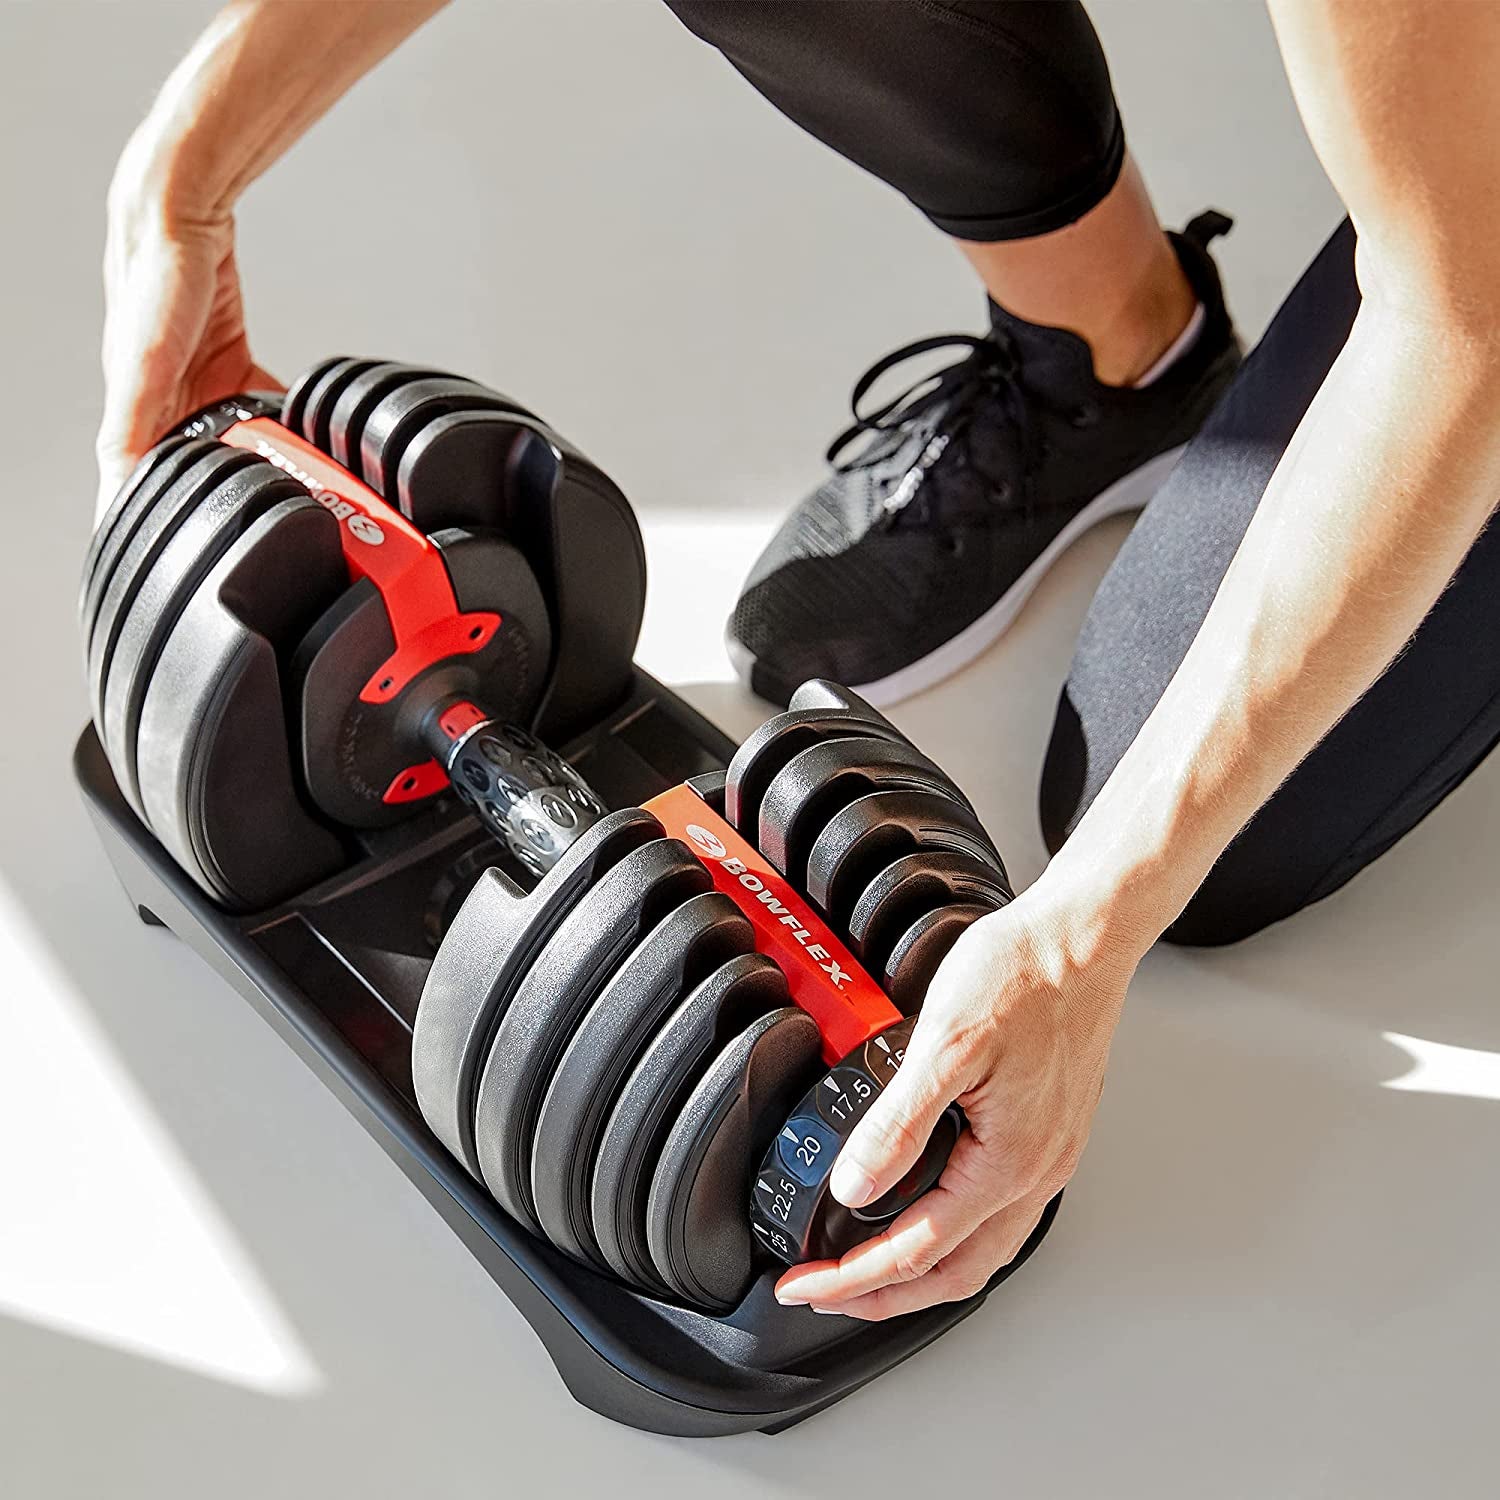 35 Cool Fitness Products To Enhance Your Workouts